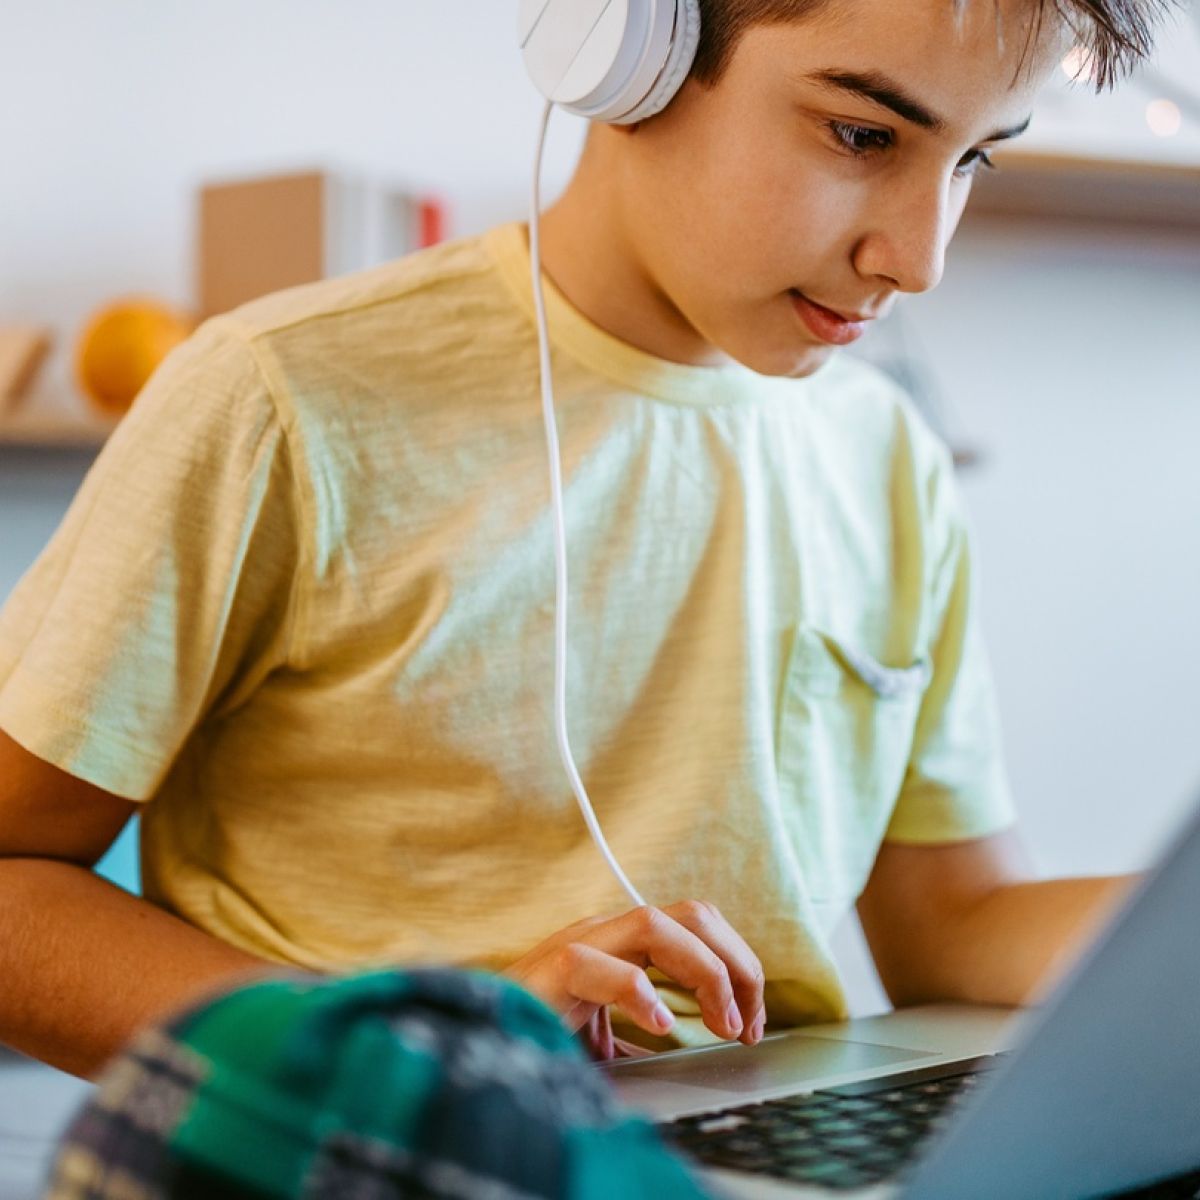 Bf 50 Years - My 12-year-old son is looking up porn. What should I do?'